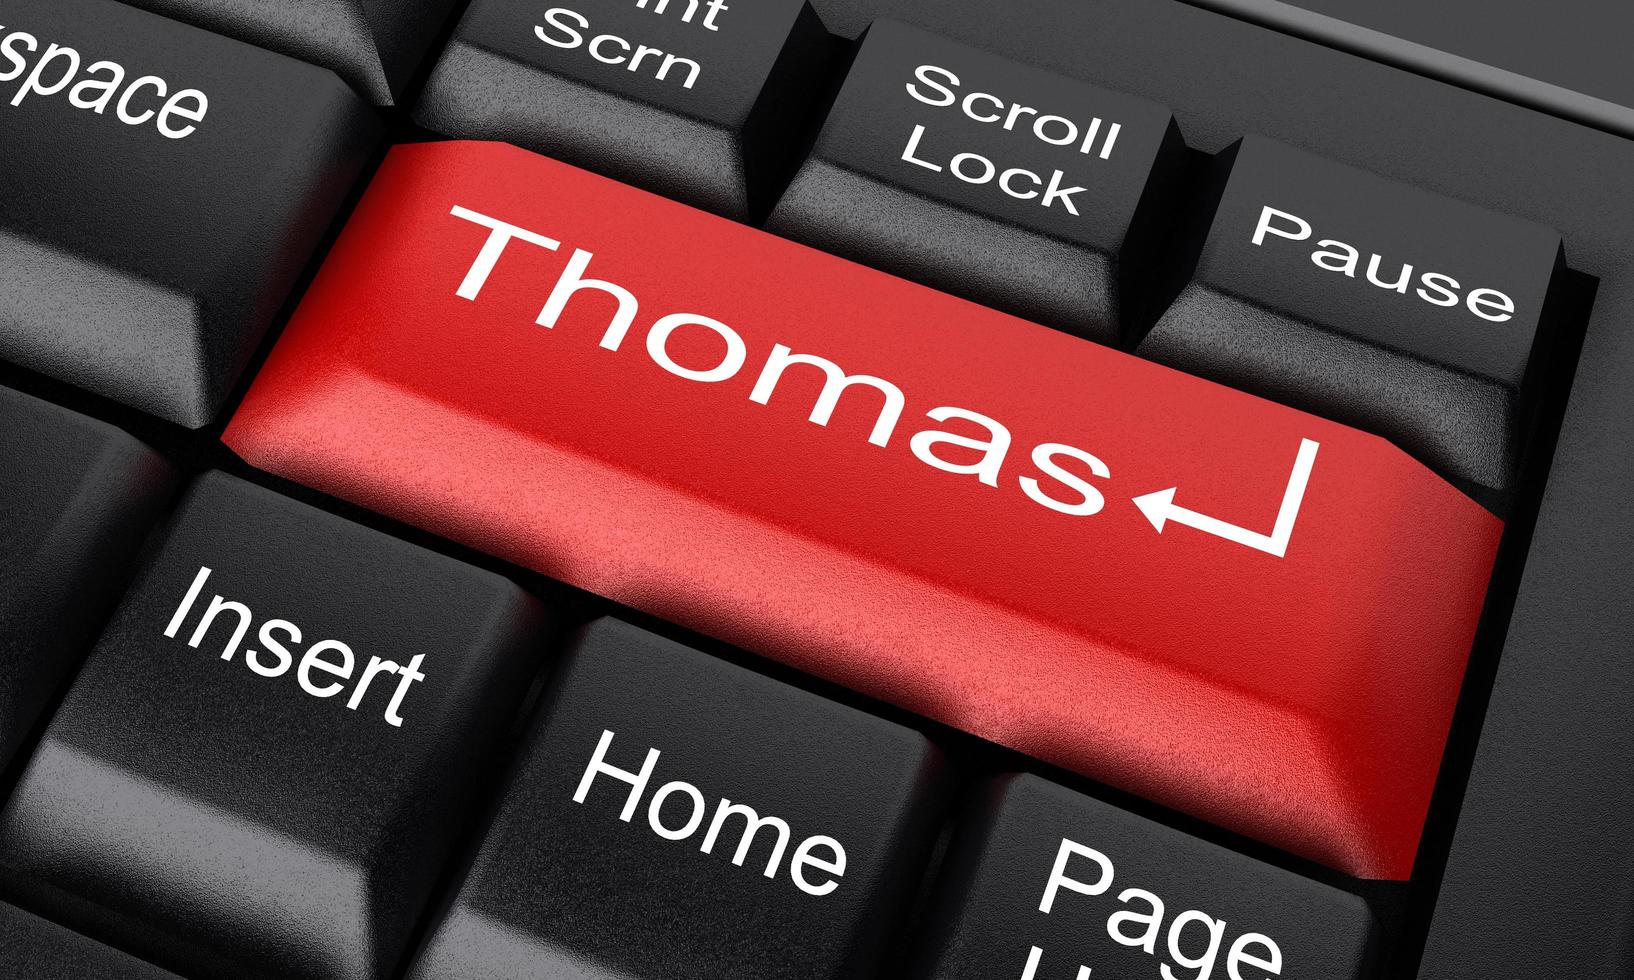 Thomas word on red keyboard button photo